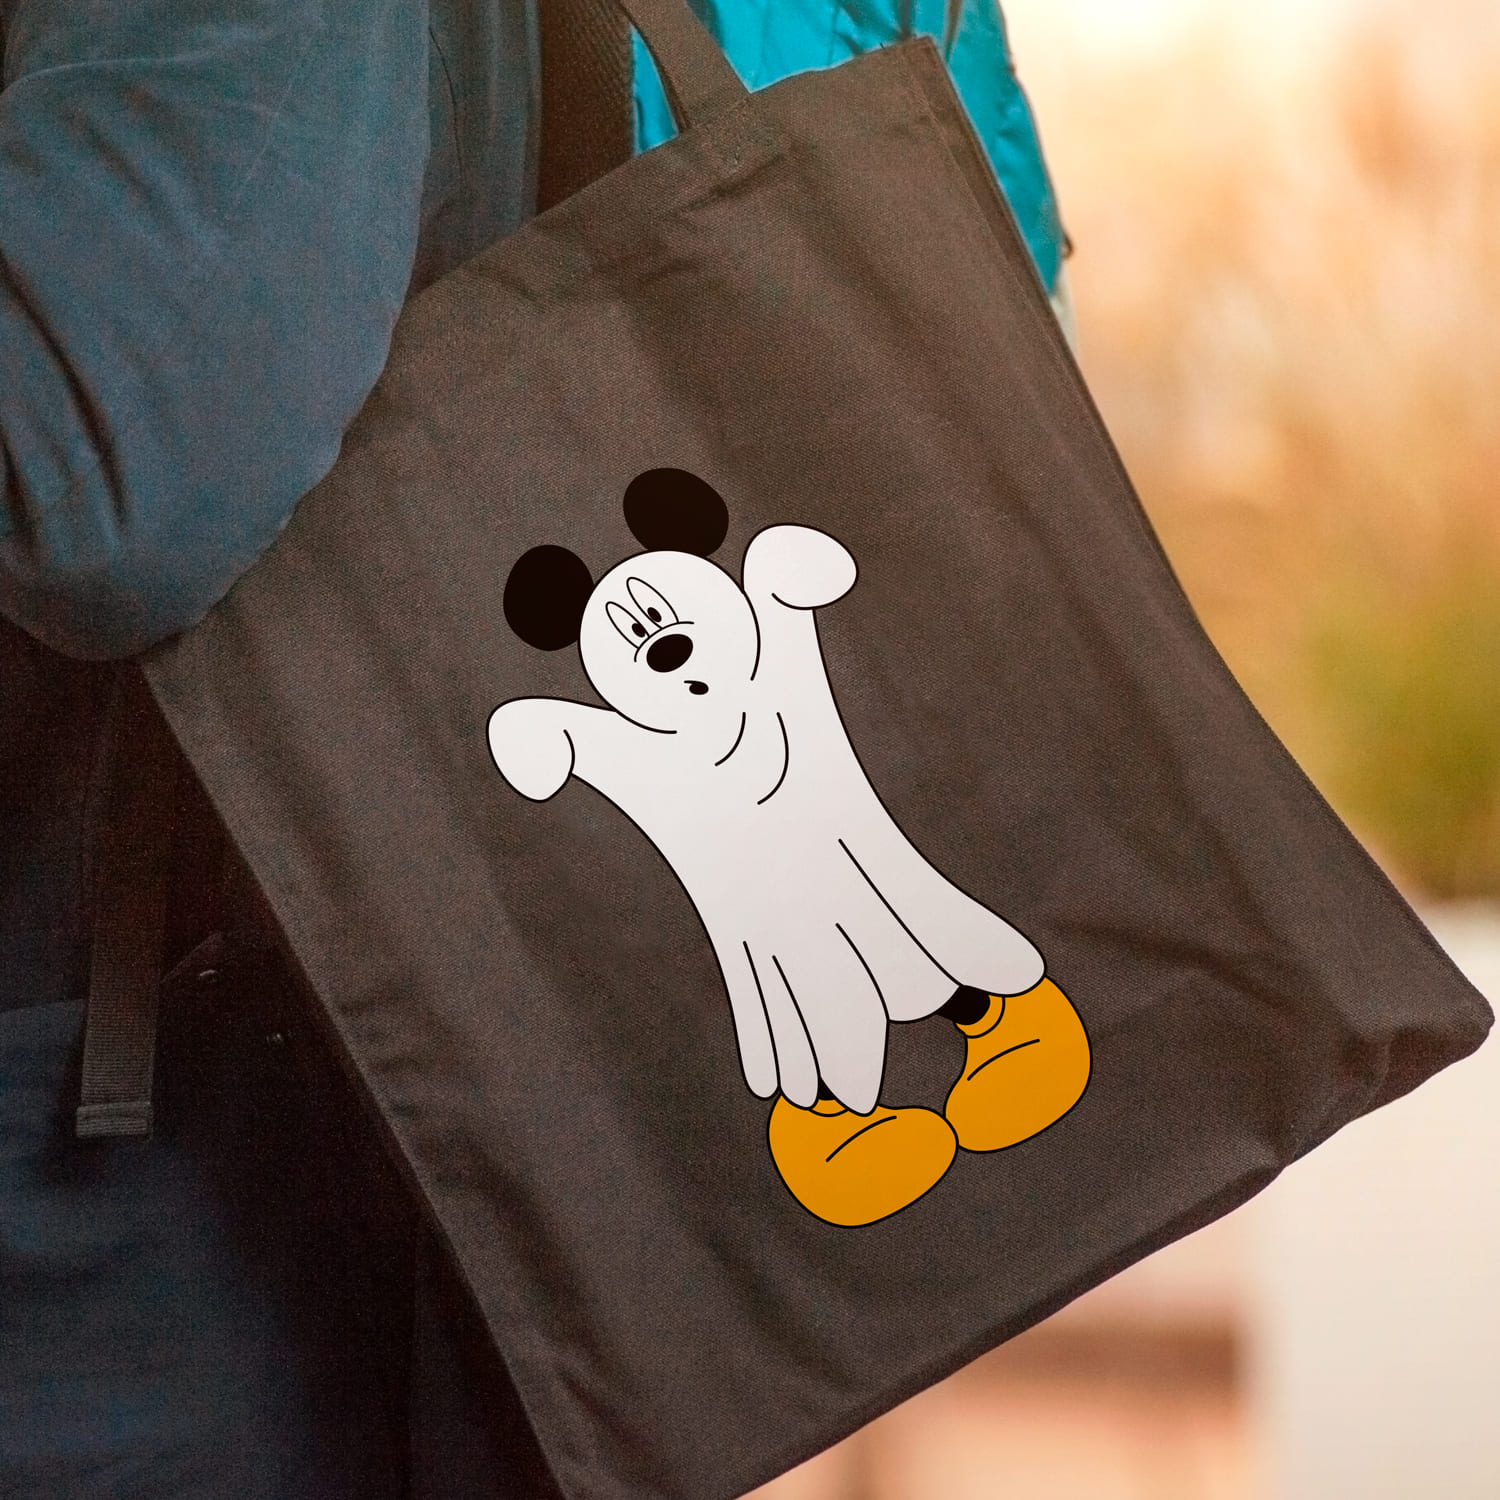 Shopping bag with Mickey Mouse Ghost image.